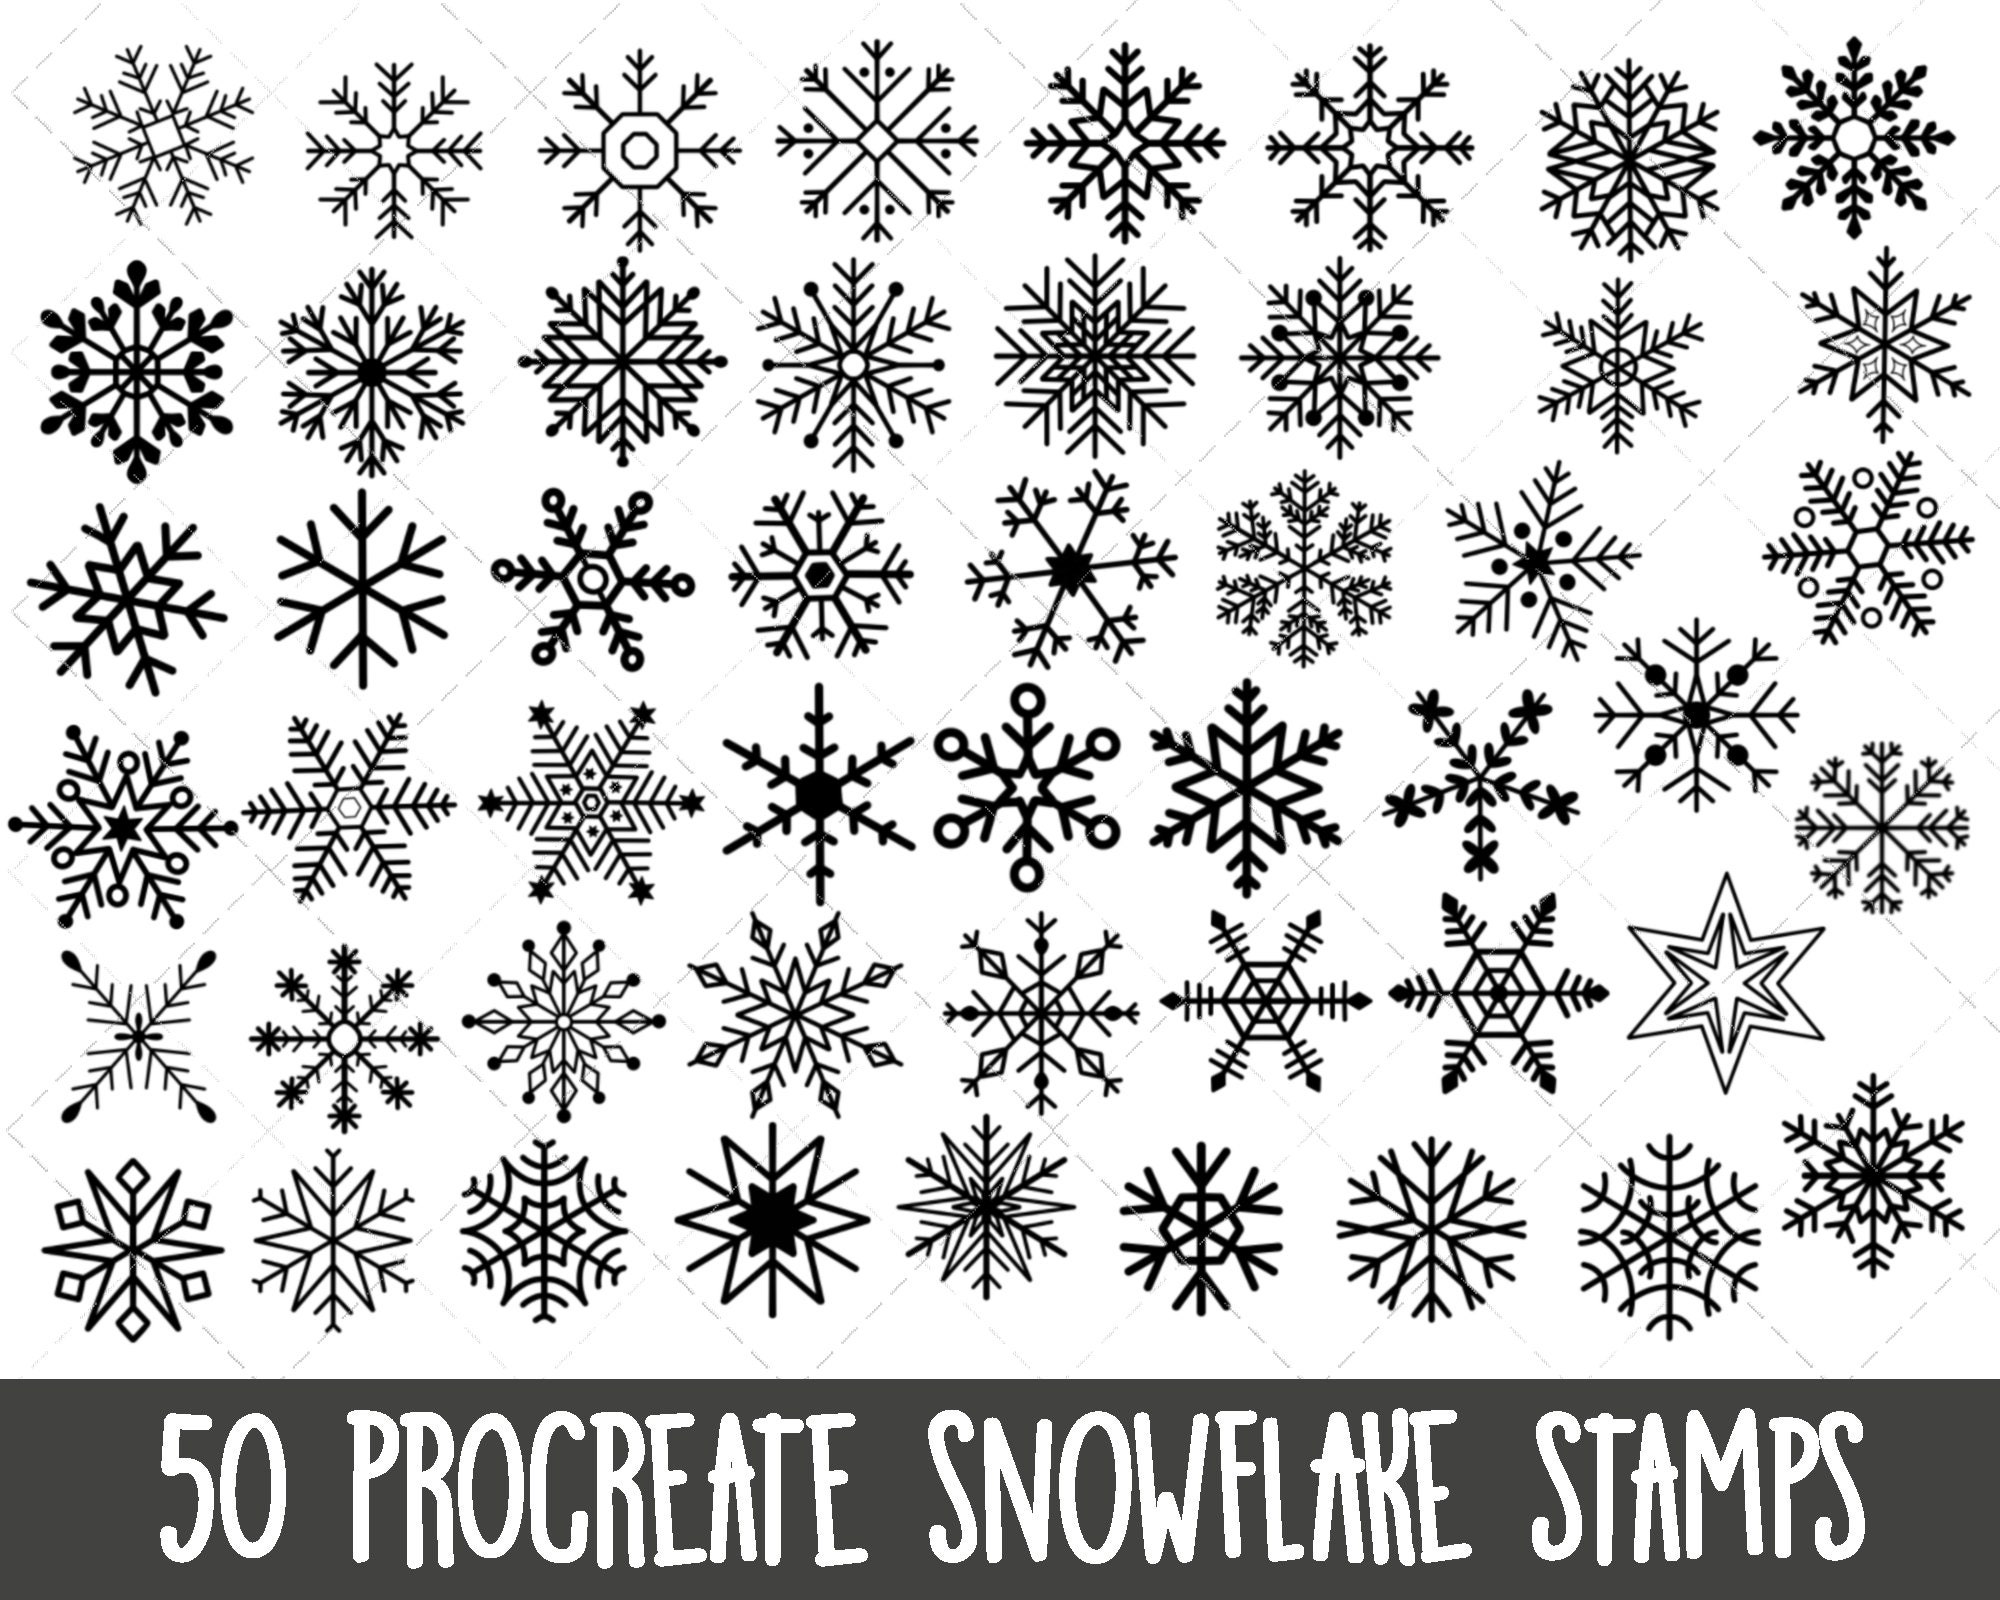 Tiny Snowflake Rubber Stamp SET 16mm Buy 4, 1 Free, Christmas Winter  Holiday Gift Tag Stamp Handmade by Blossom Stamps 